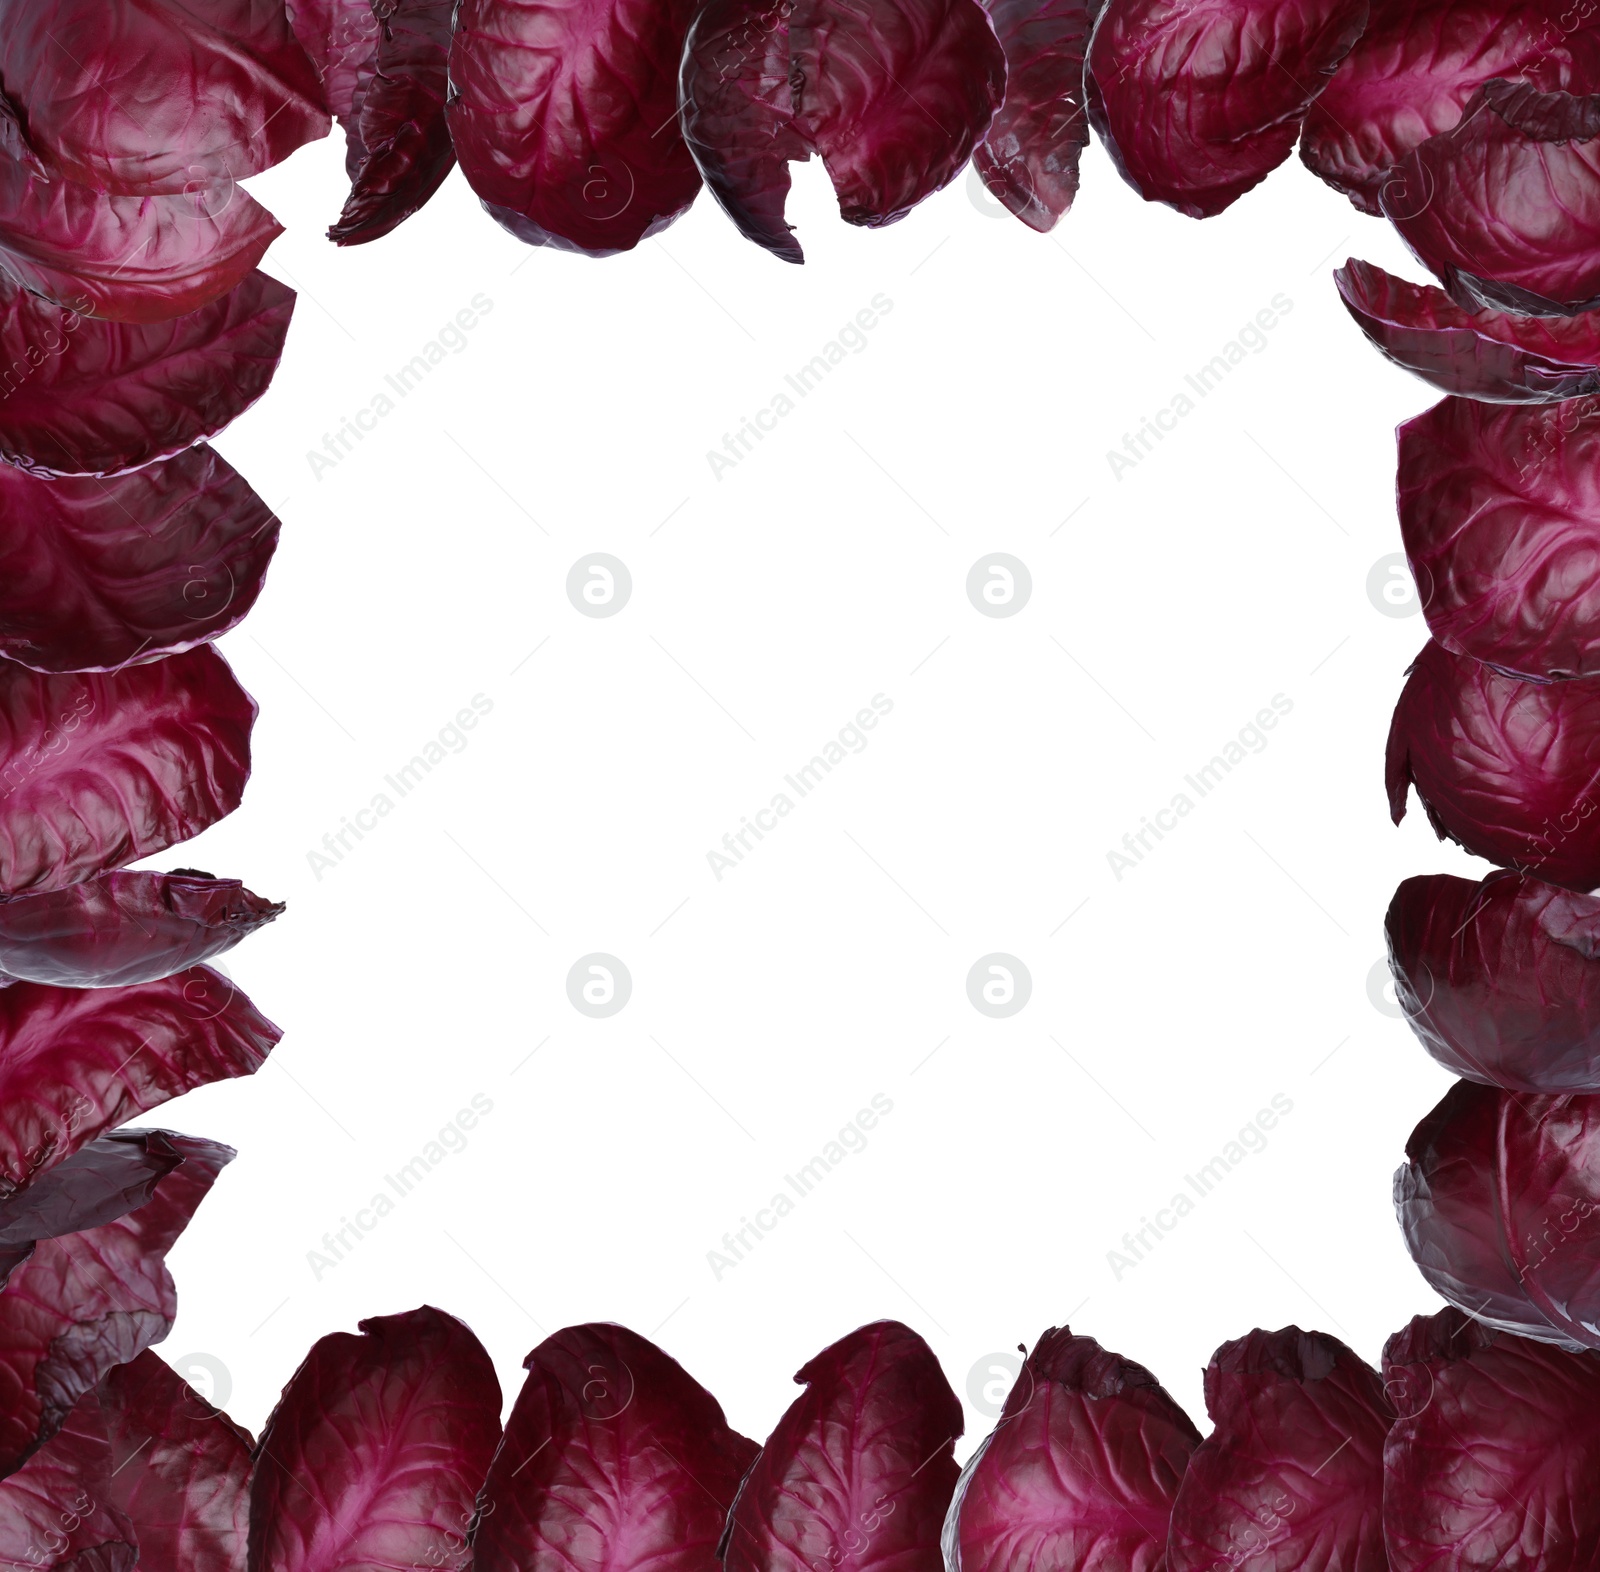 Image of Frame made with fresh leaves of red cabbage on white background. Space for design